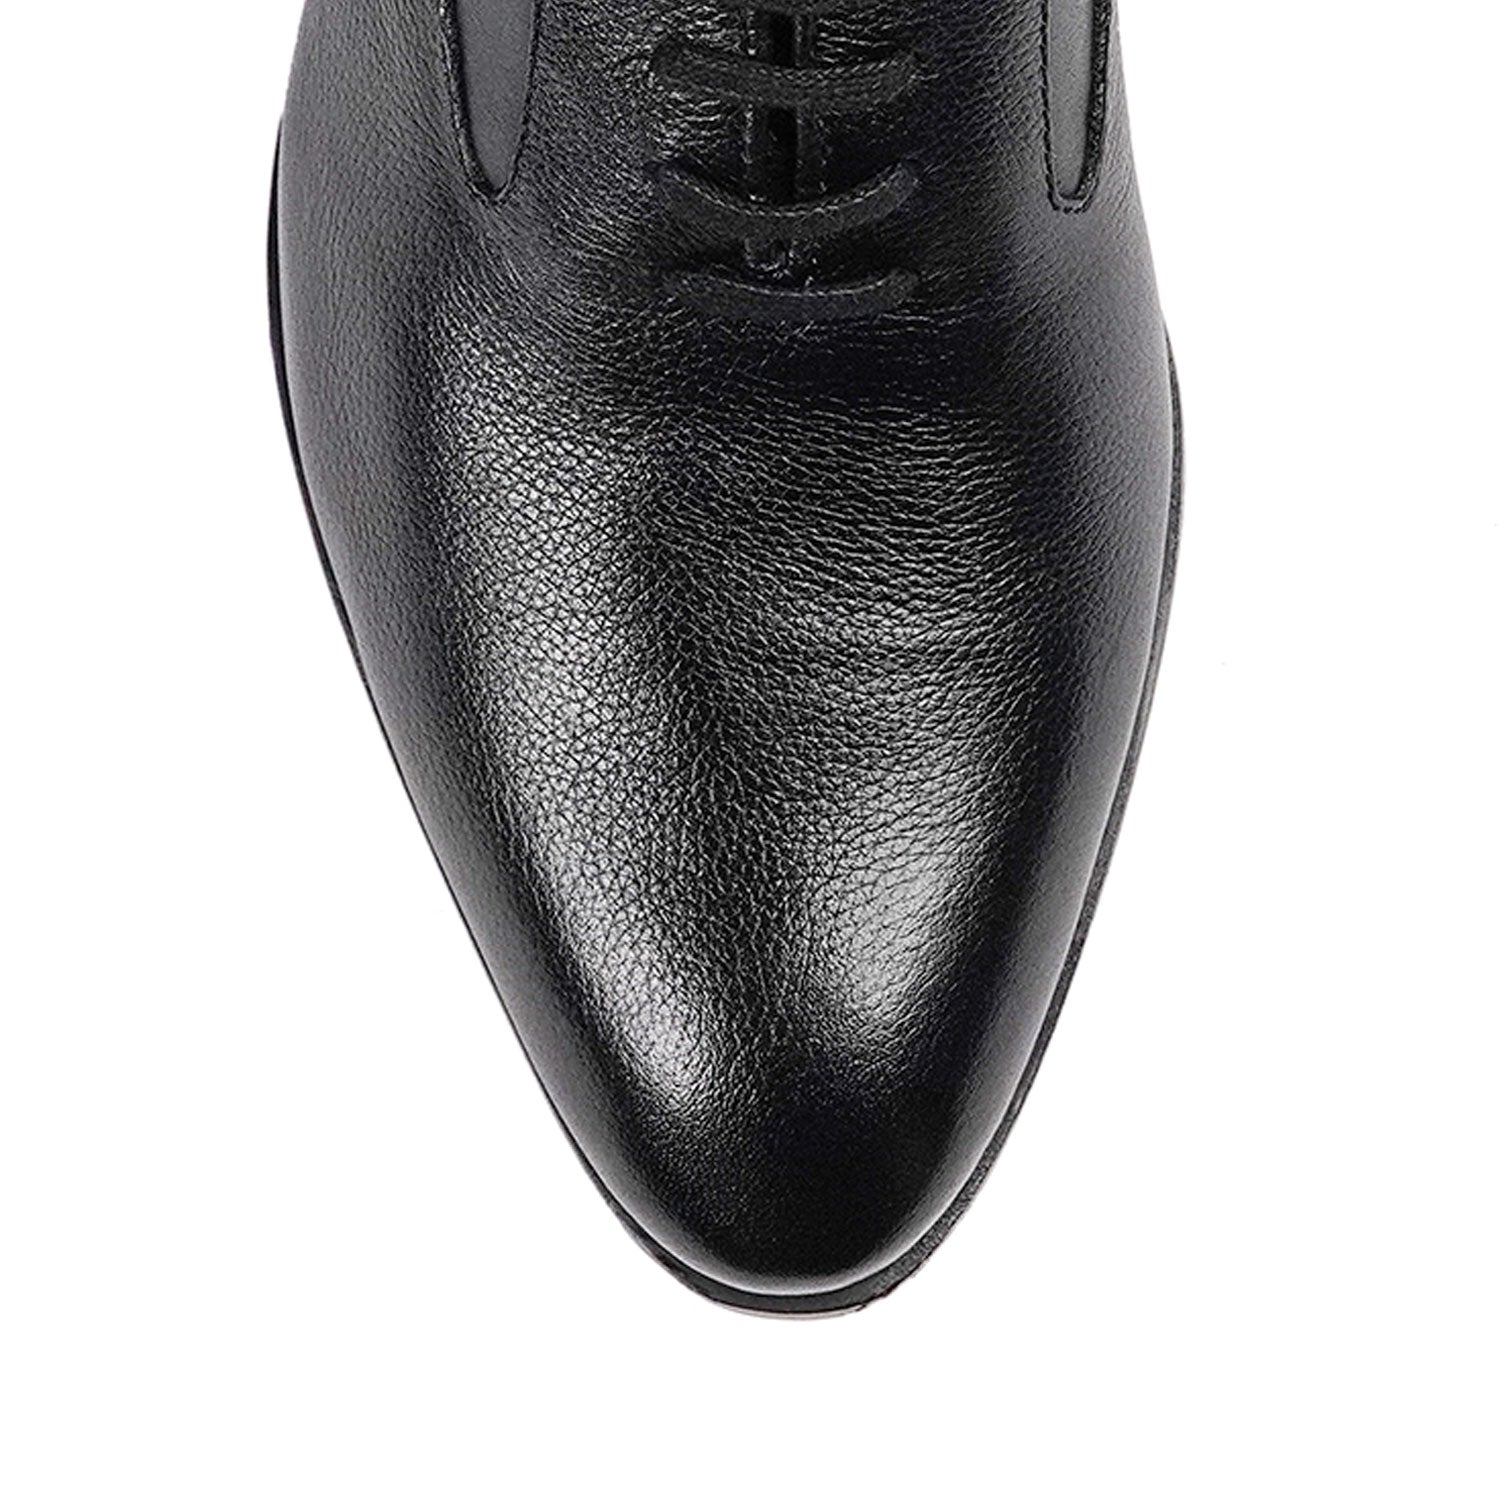 Rochester Oxford Shoes - Black